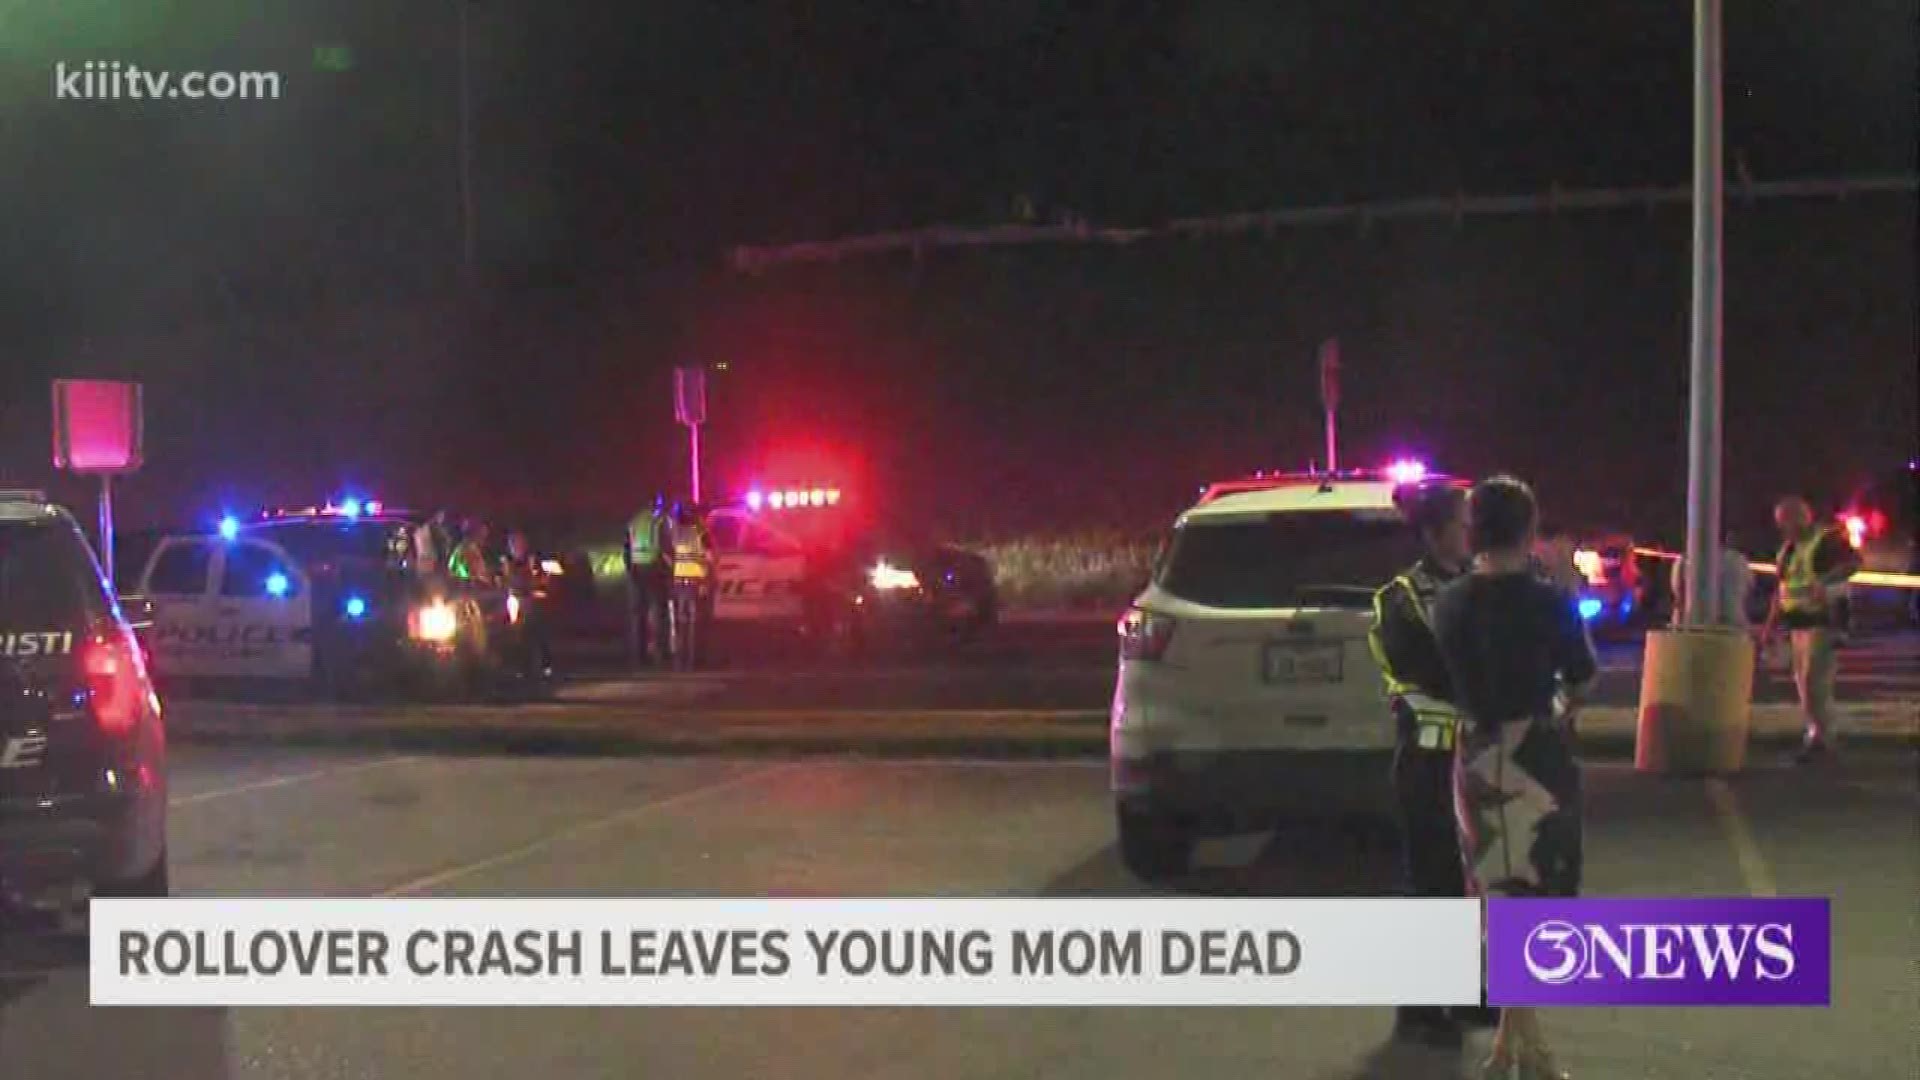 One woman is dead, and two young children seriously injured after a car flipped off the Crosstown Expressway overpass.